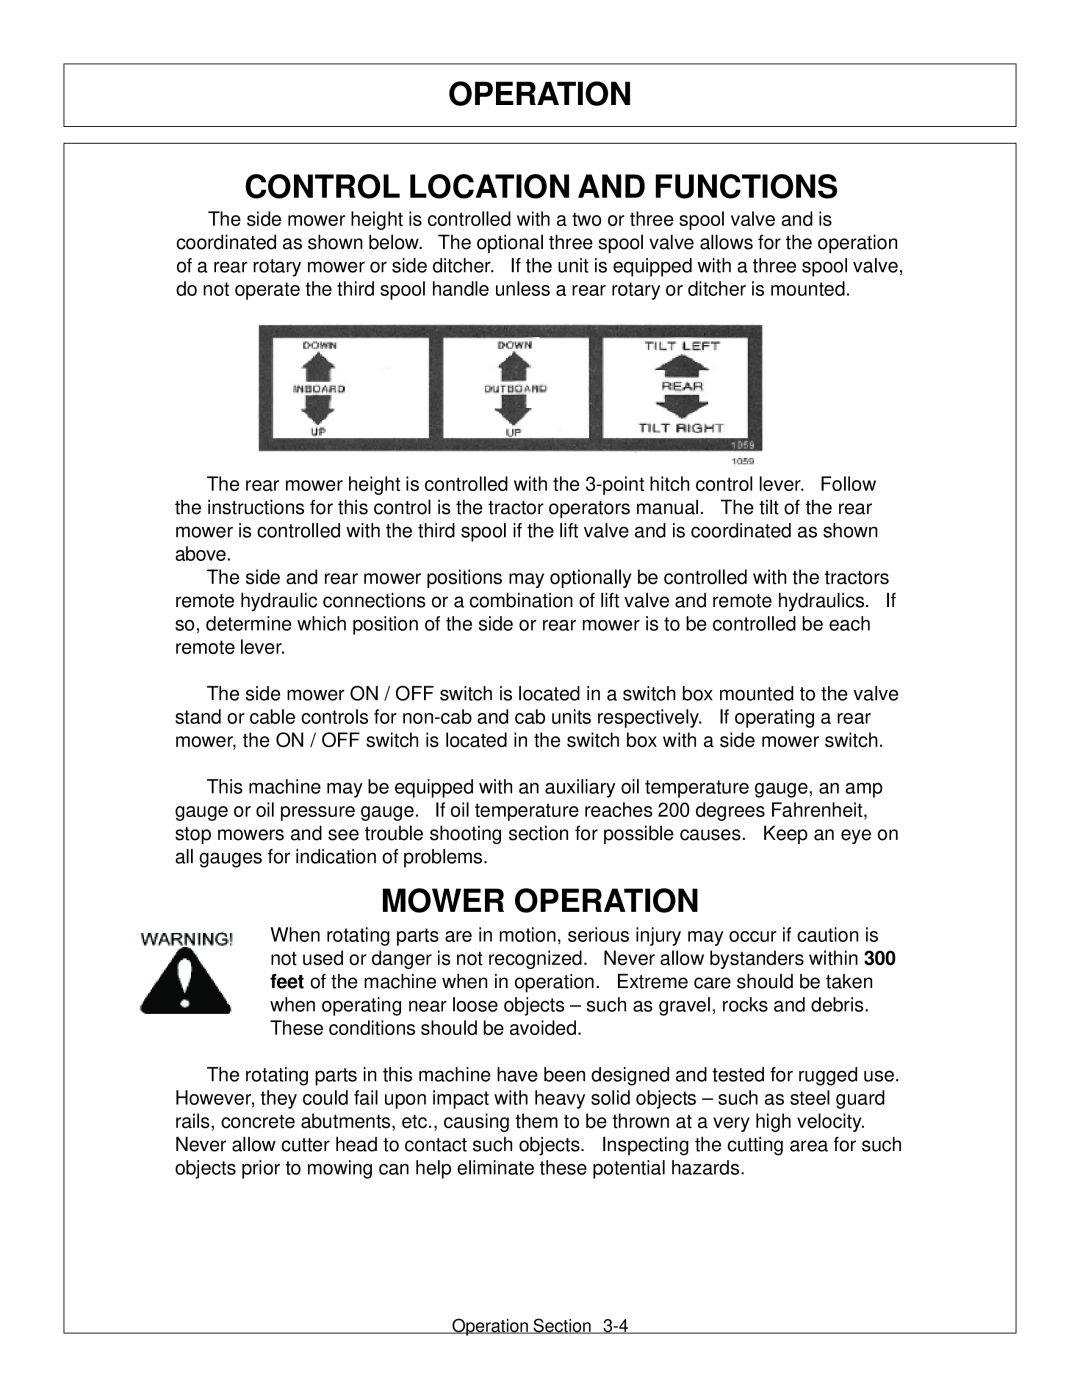 Tiger Products Co., Ltd JD 72-7520 manual Operation Control Location And Functions, Mower Operation 